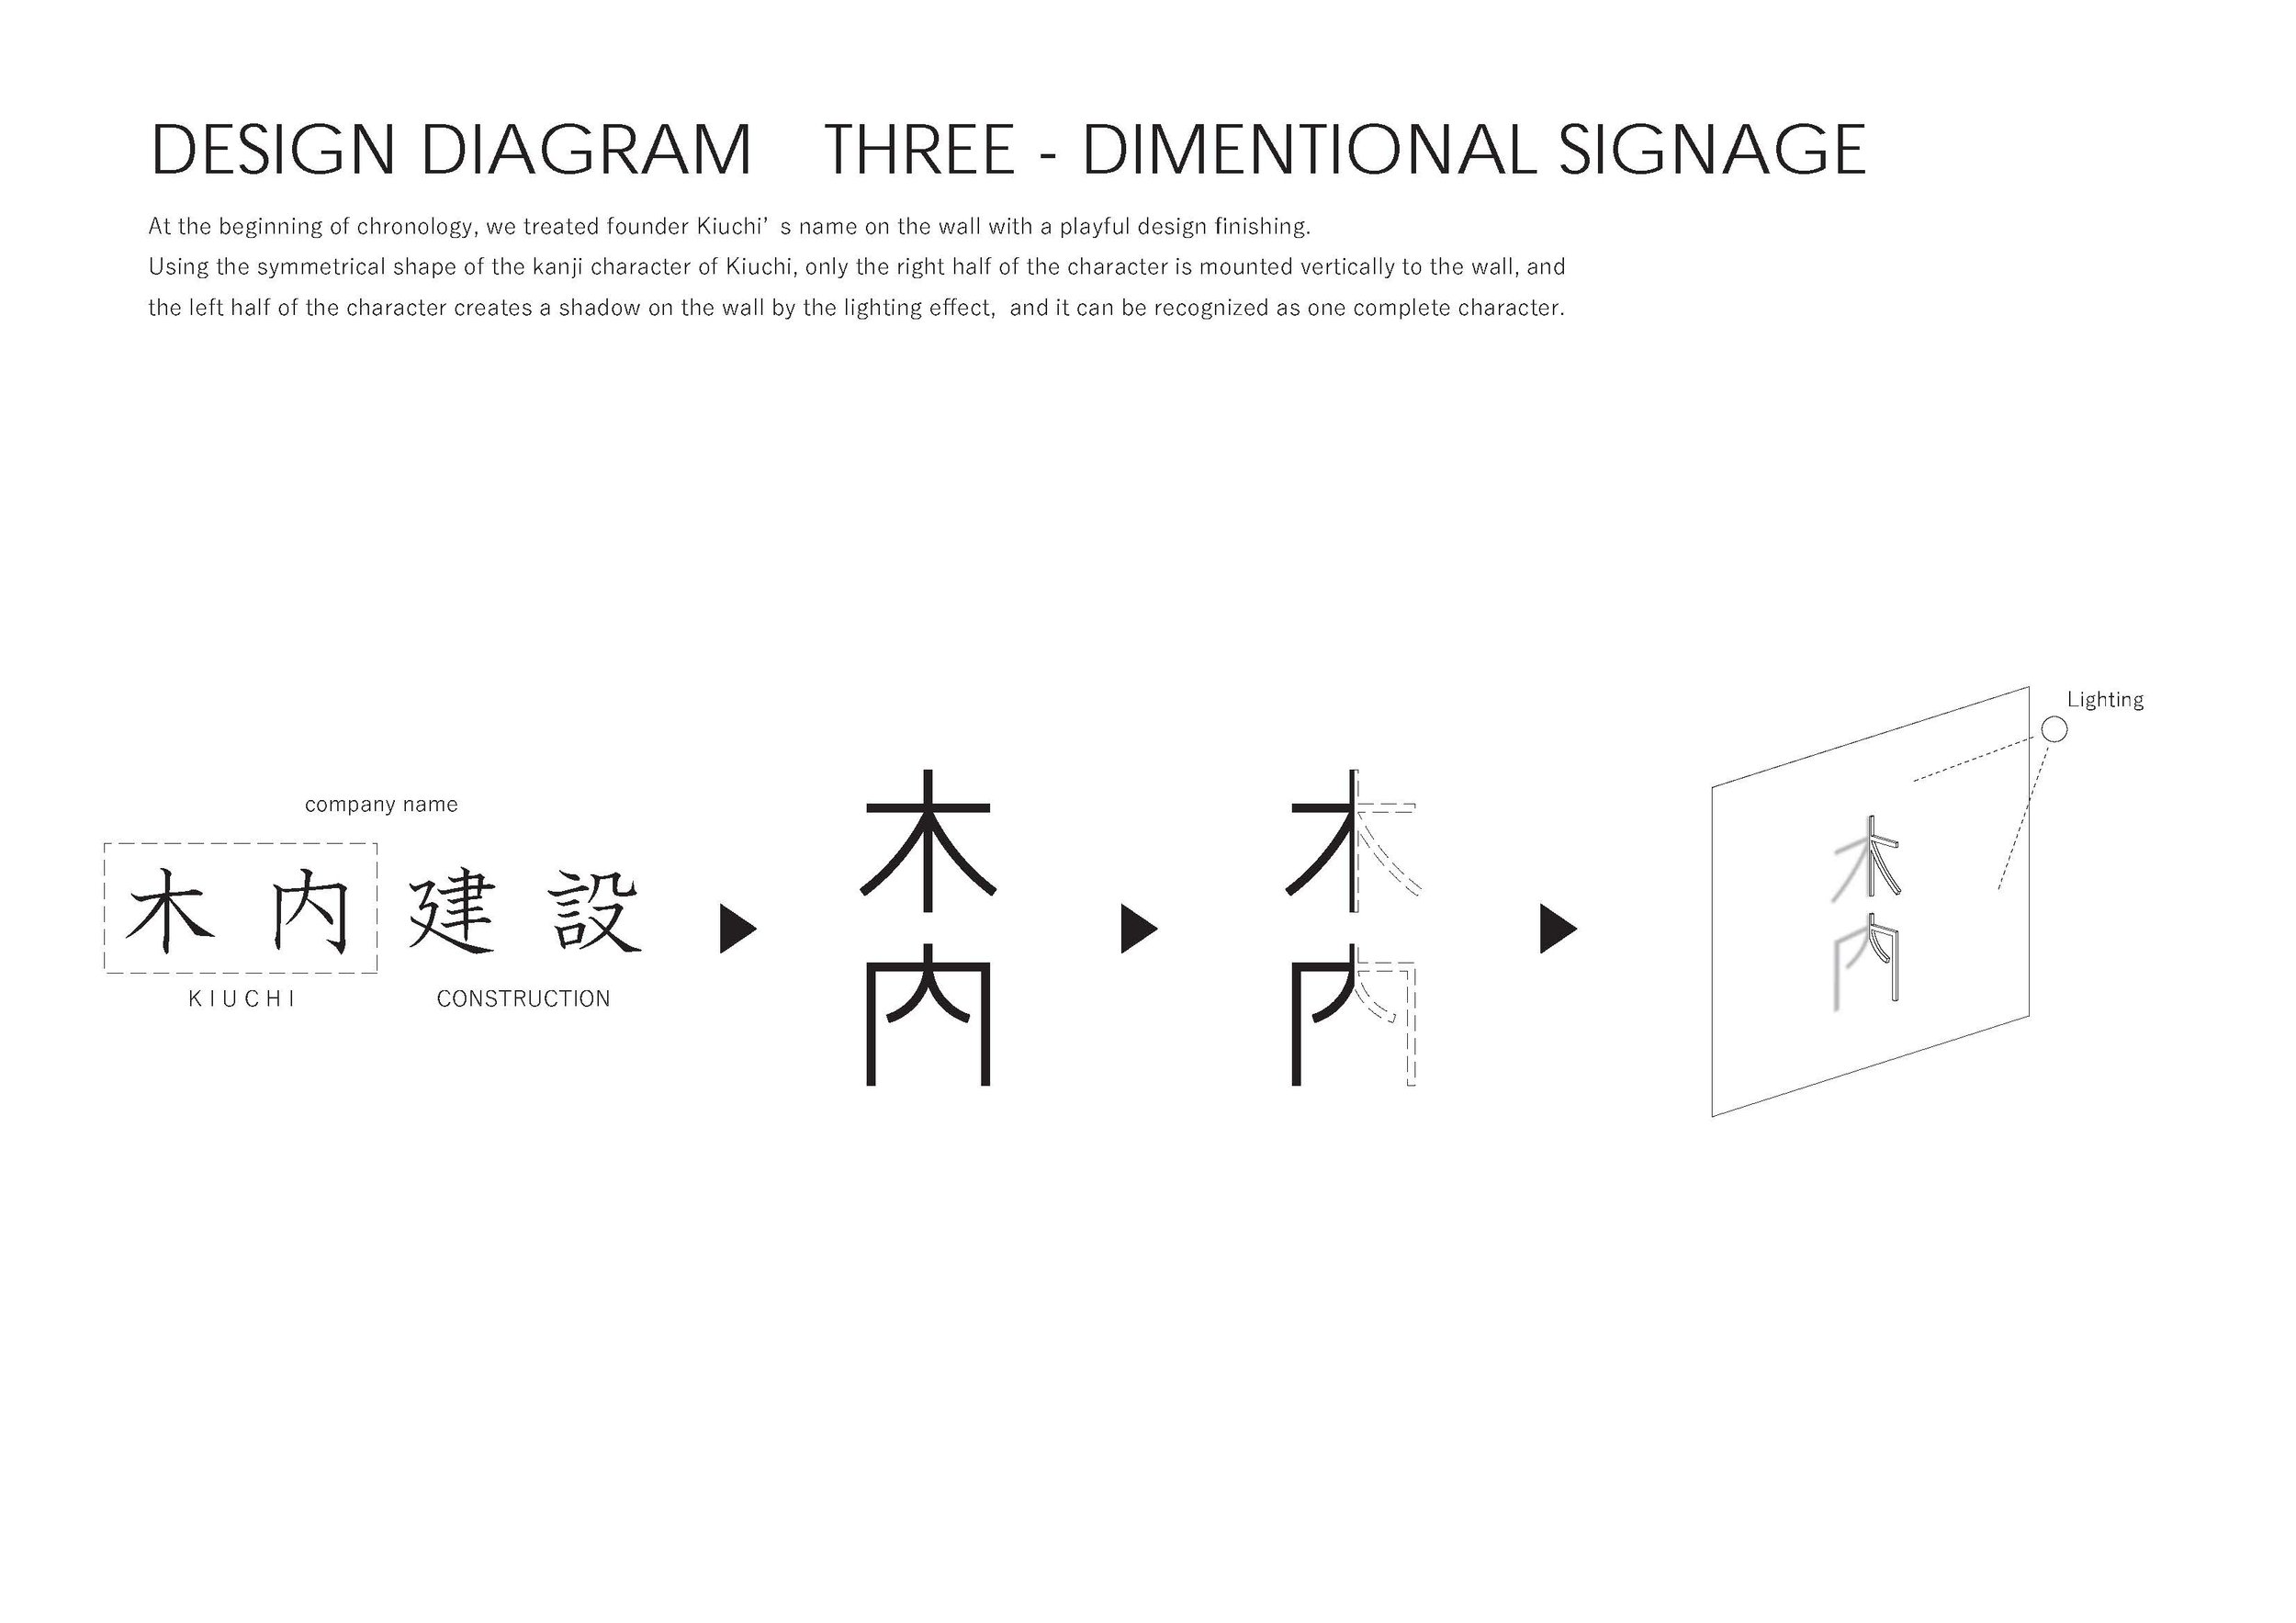 drawing document_KIUCHI 100 YEARS HISTORY GALLERY_Page_4.jpg